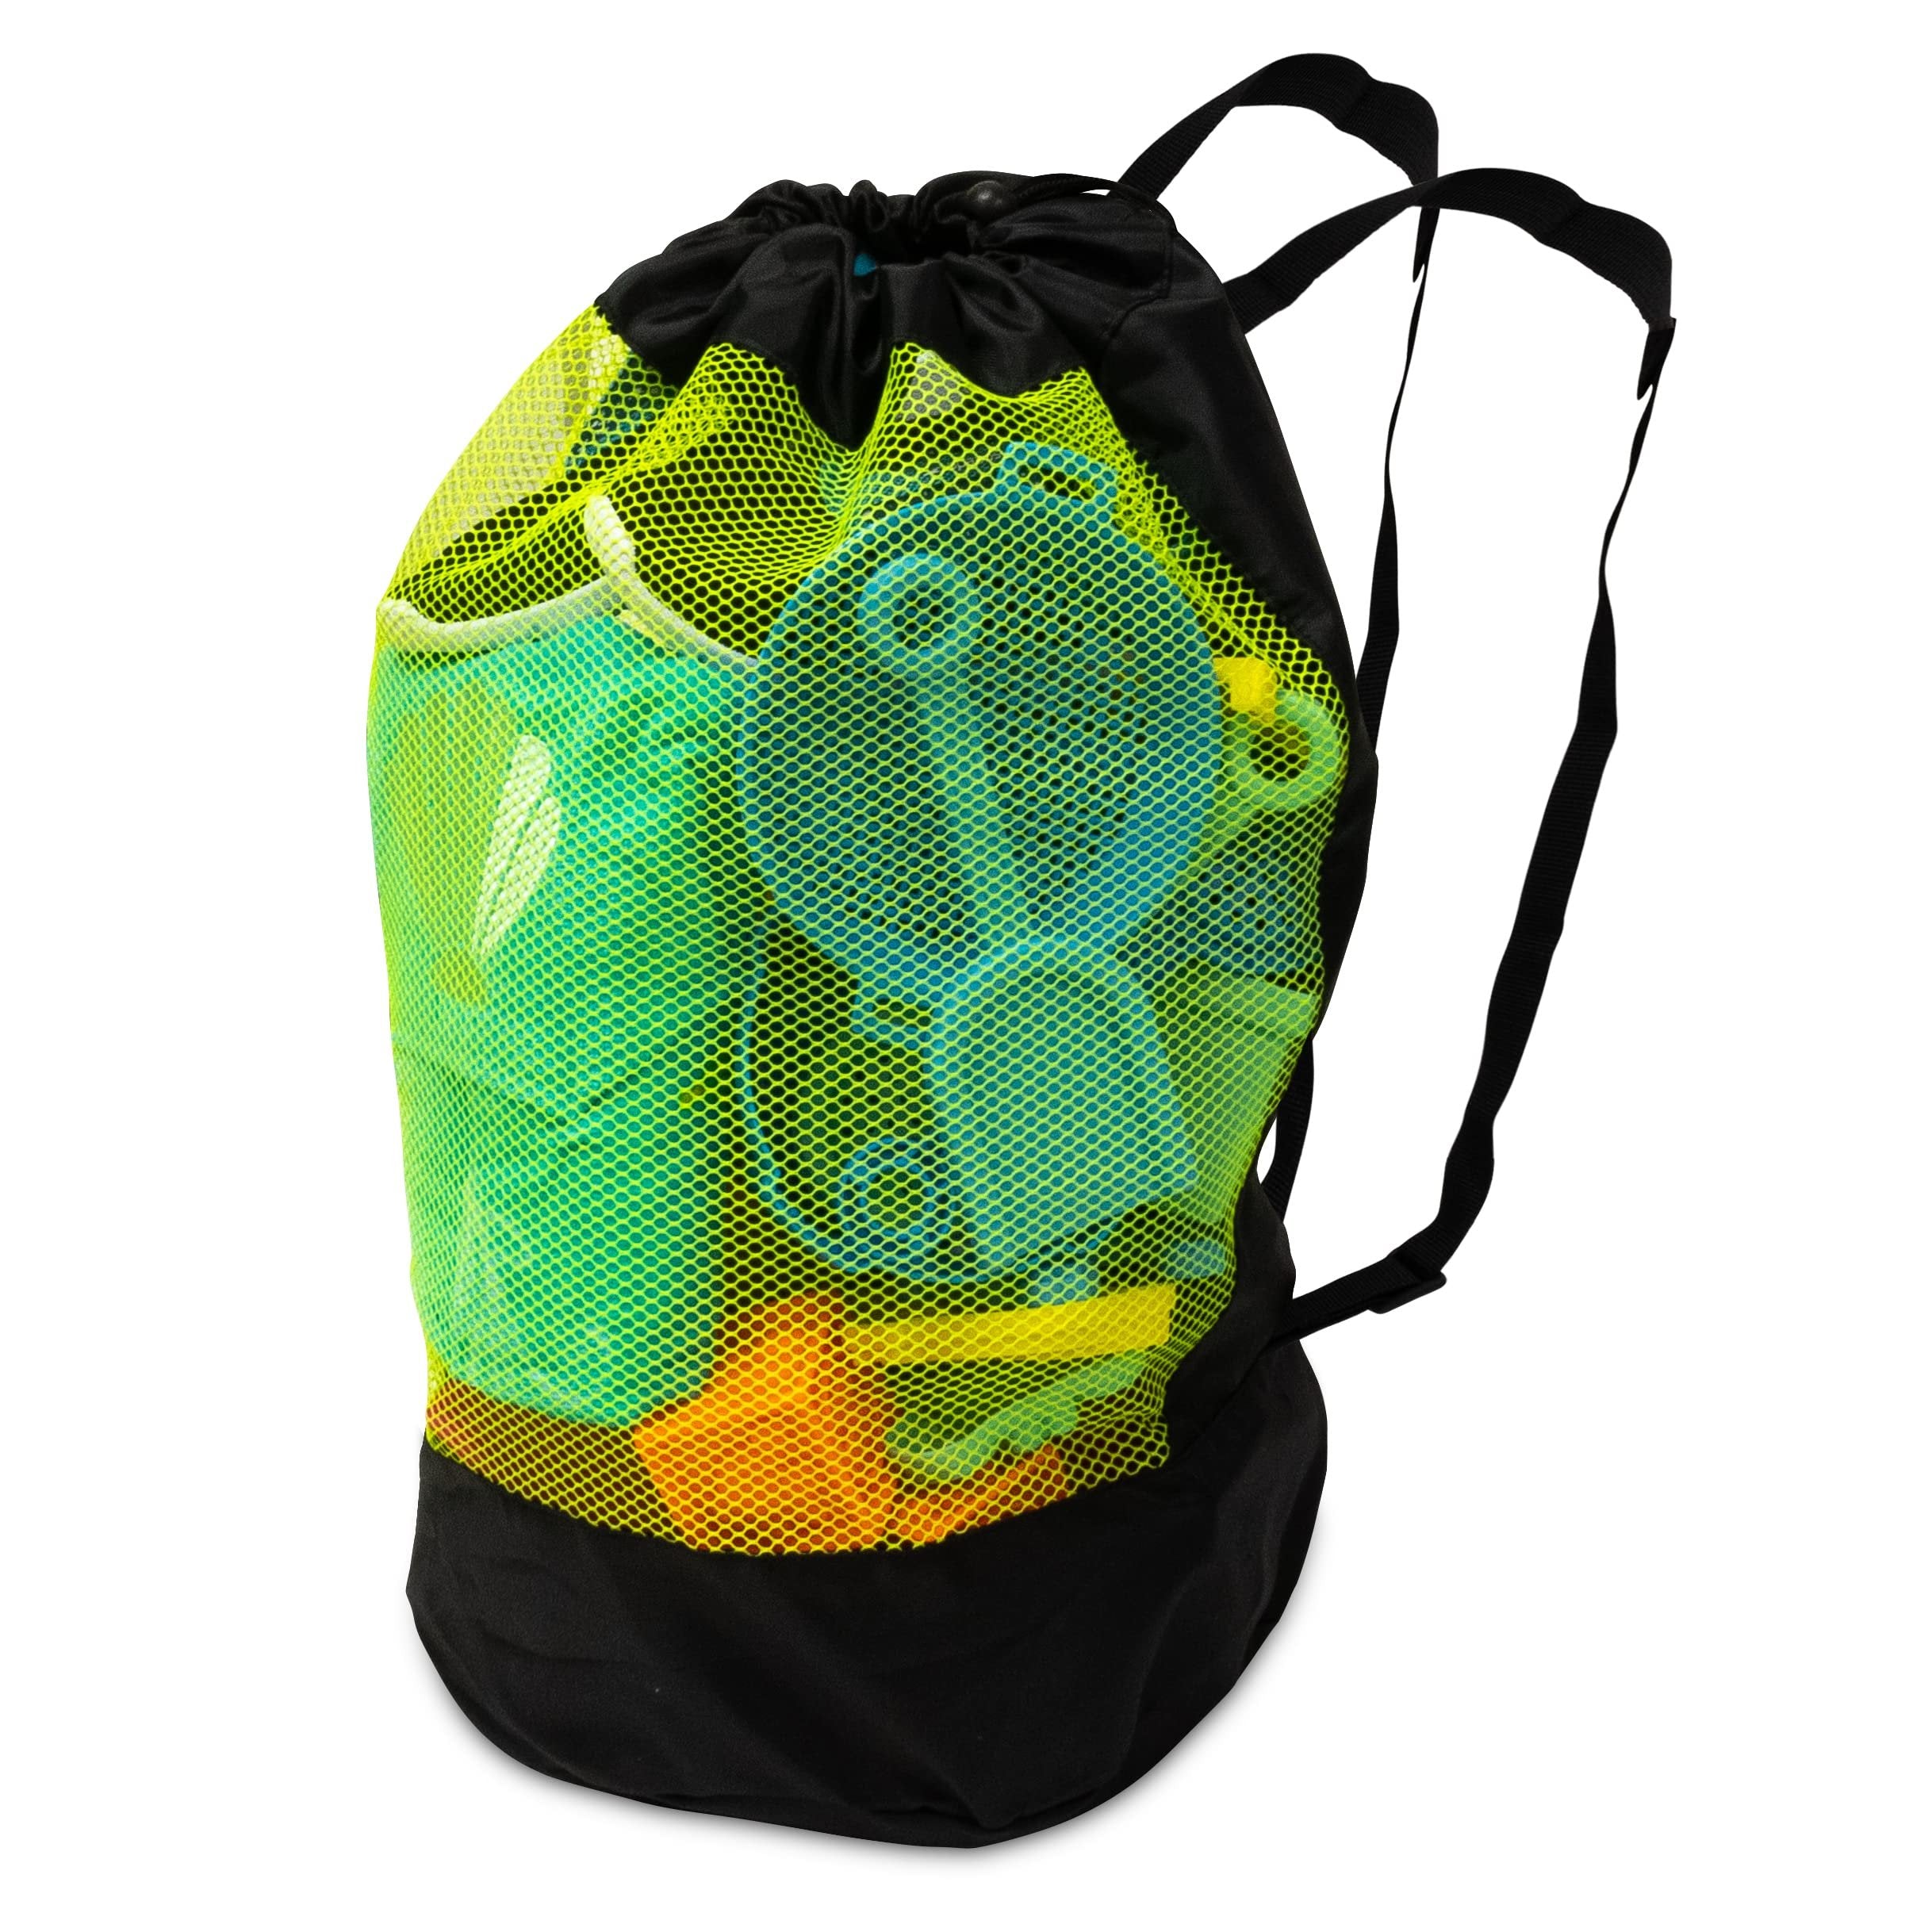 Large Beach Toy Bag Backpack for Kids - Durable Waterproof, Black & Neon Green, 17x10.25x20.5 Inch, Perfect for Pool, Travel & Vacation